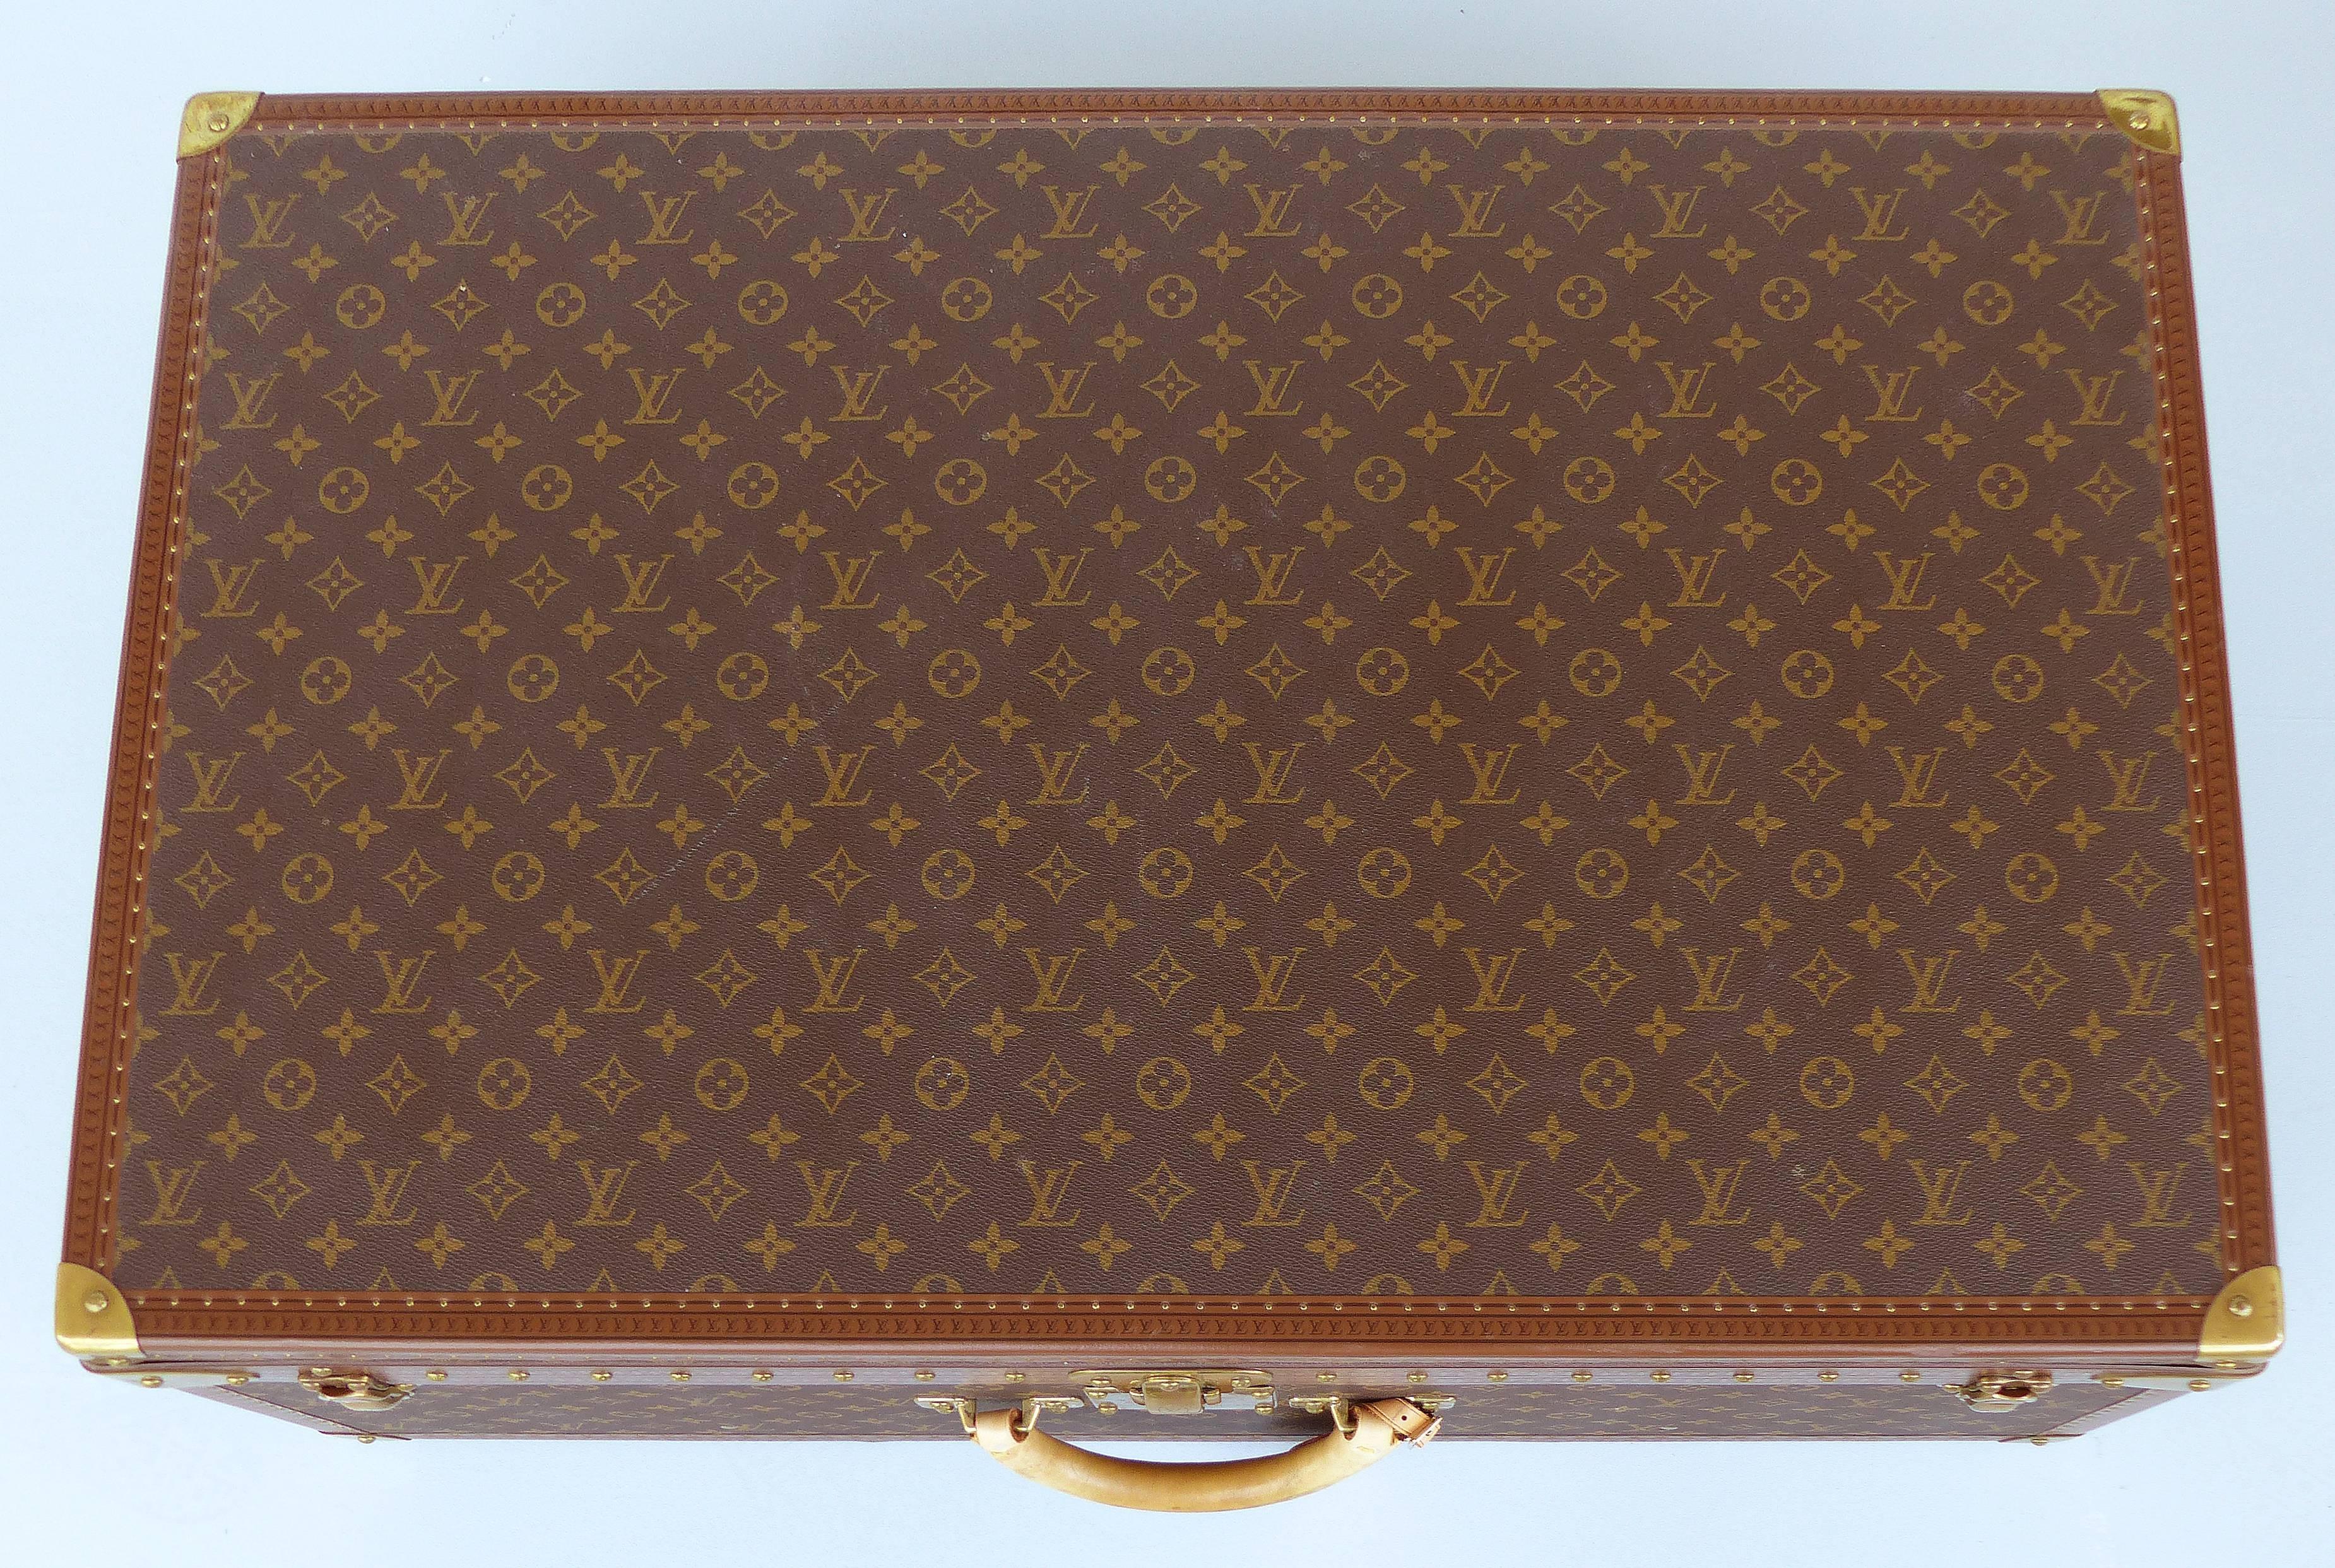 Offered for sale is a Louis Vuitton hard-sided leather Alzer 80 suitcase. The largest of this model, this beautifully crafted suitcase has the monogram finish, brass hardware, it's original protective outer cover and it's serial number 1067519. In